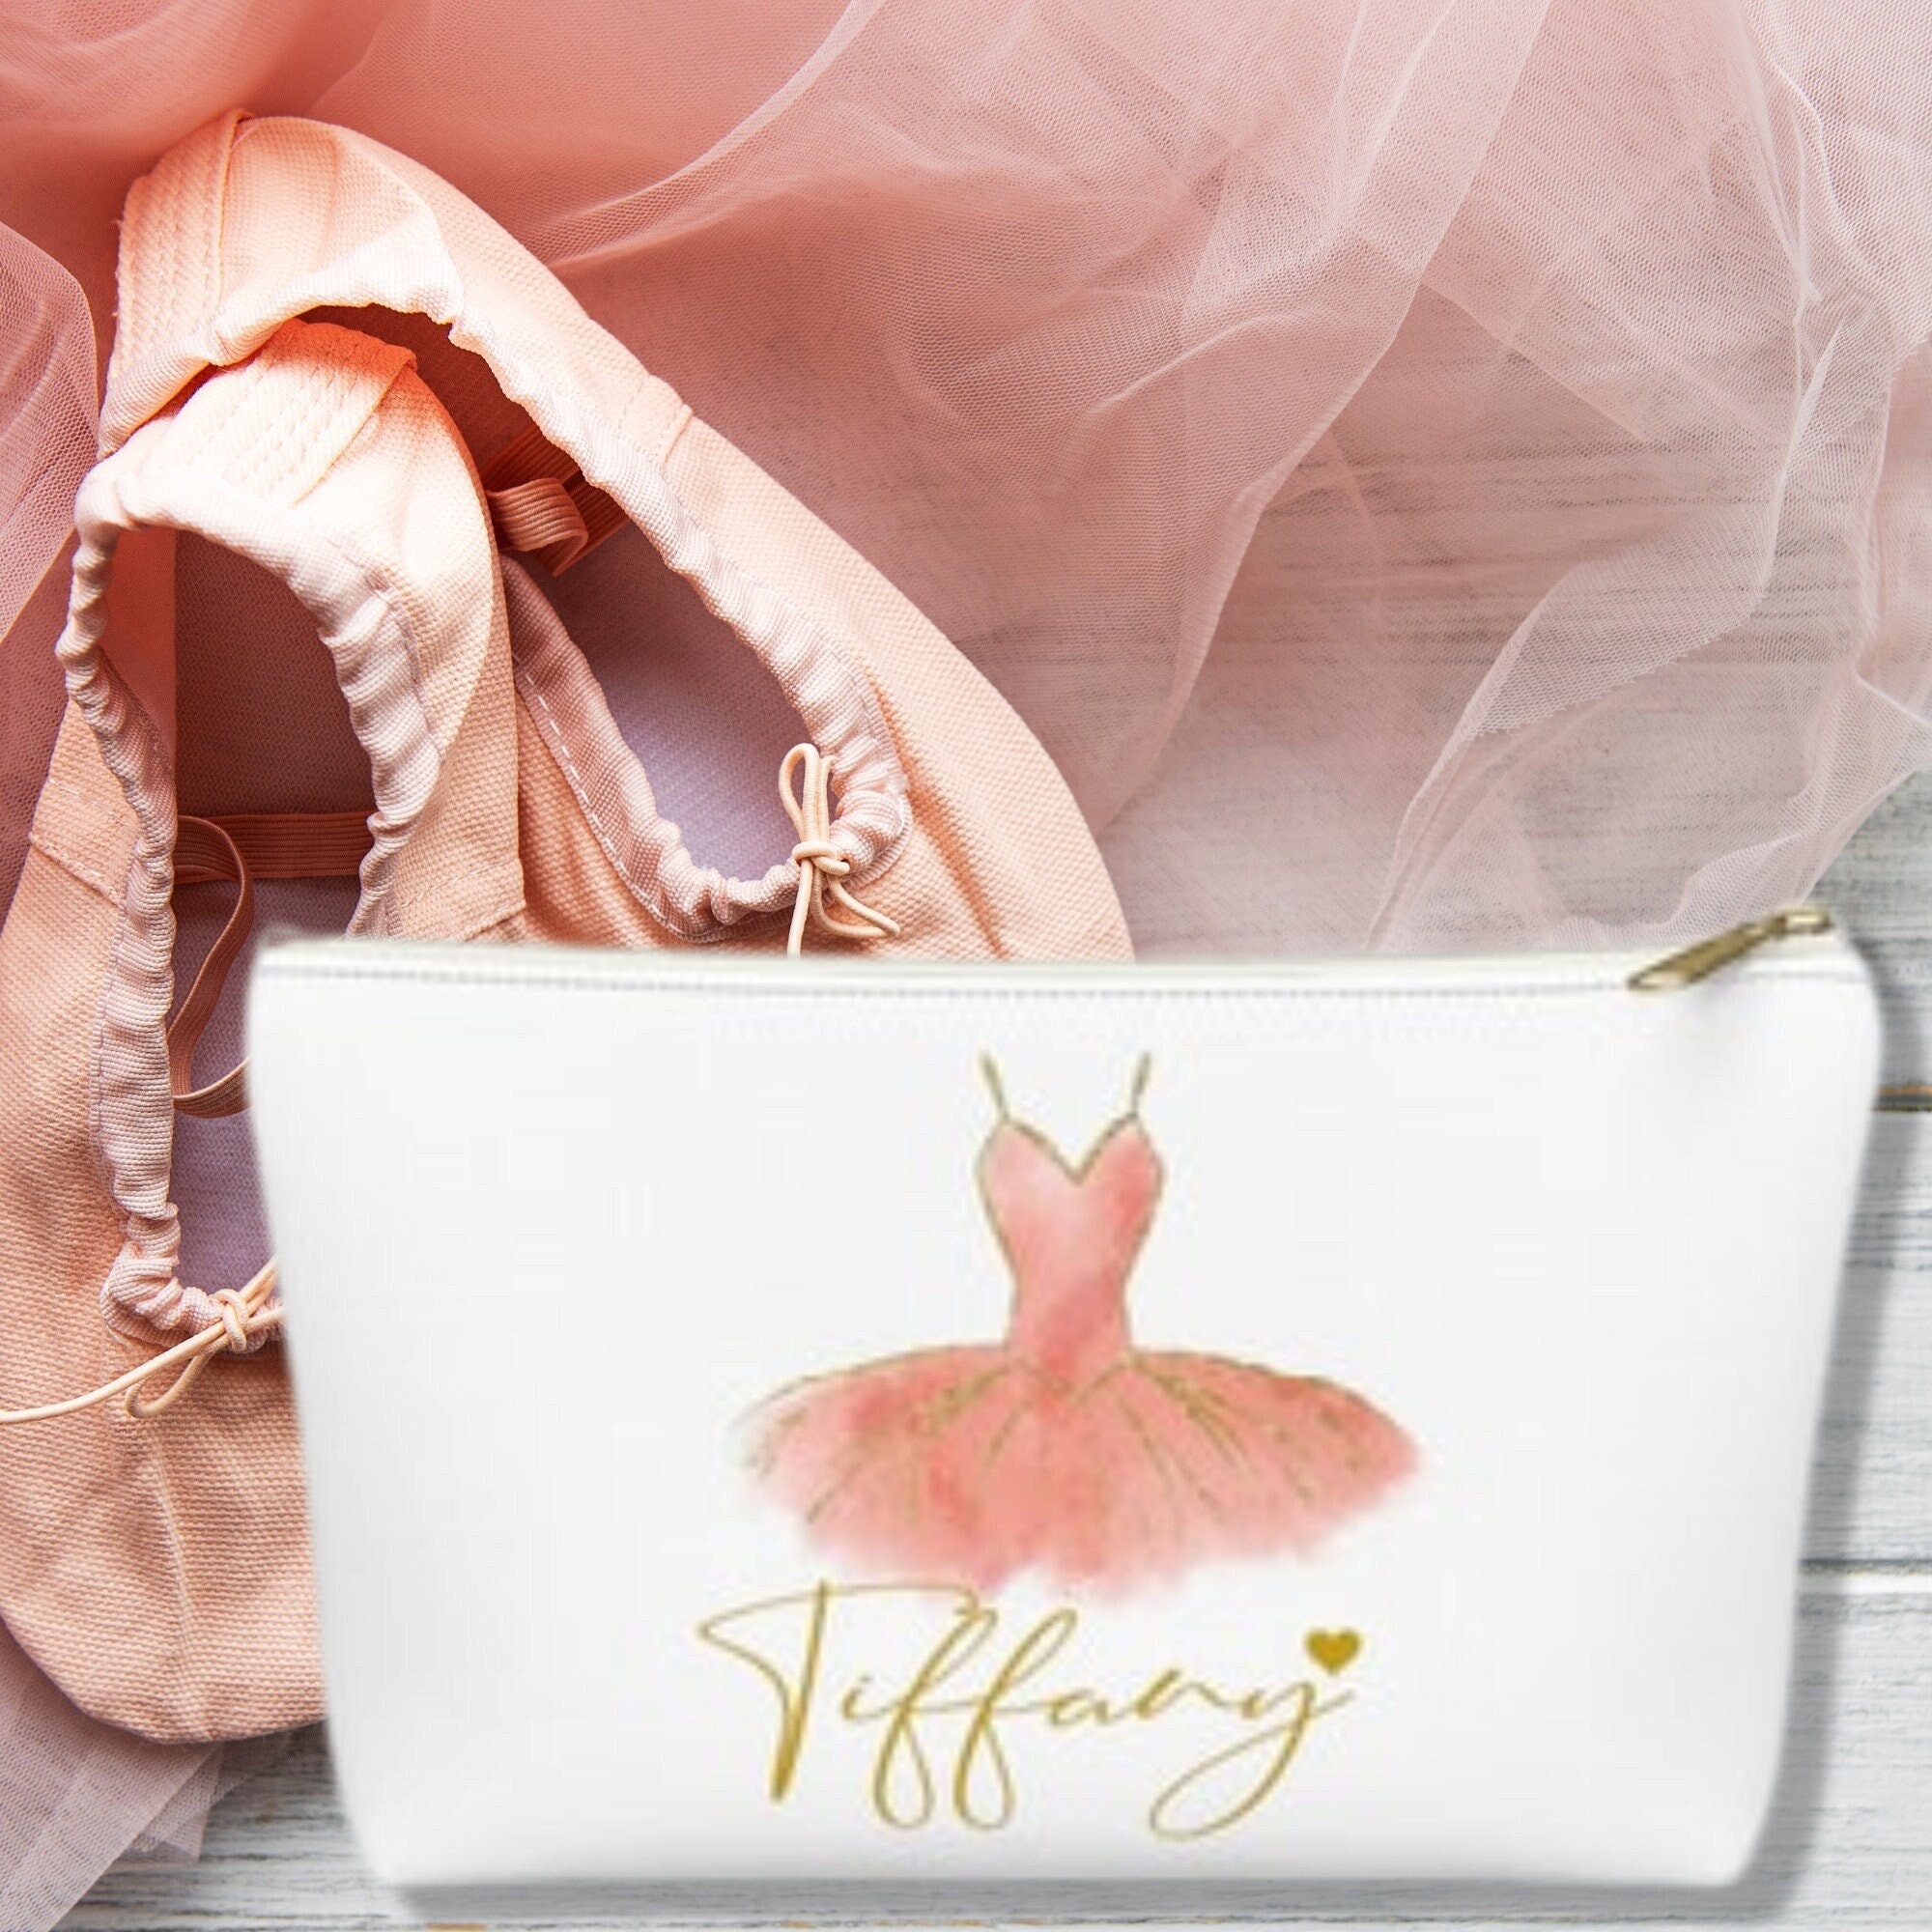 The 5 Best Makeup Bags & Cases for Dance & Ballet